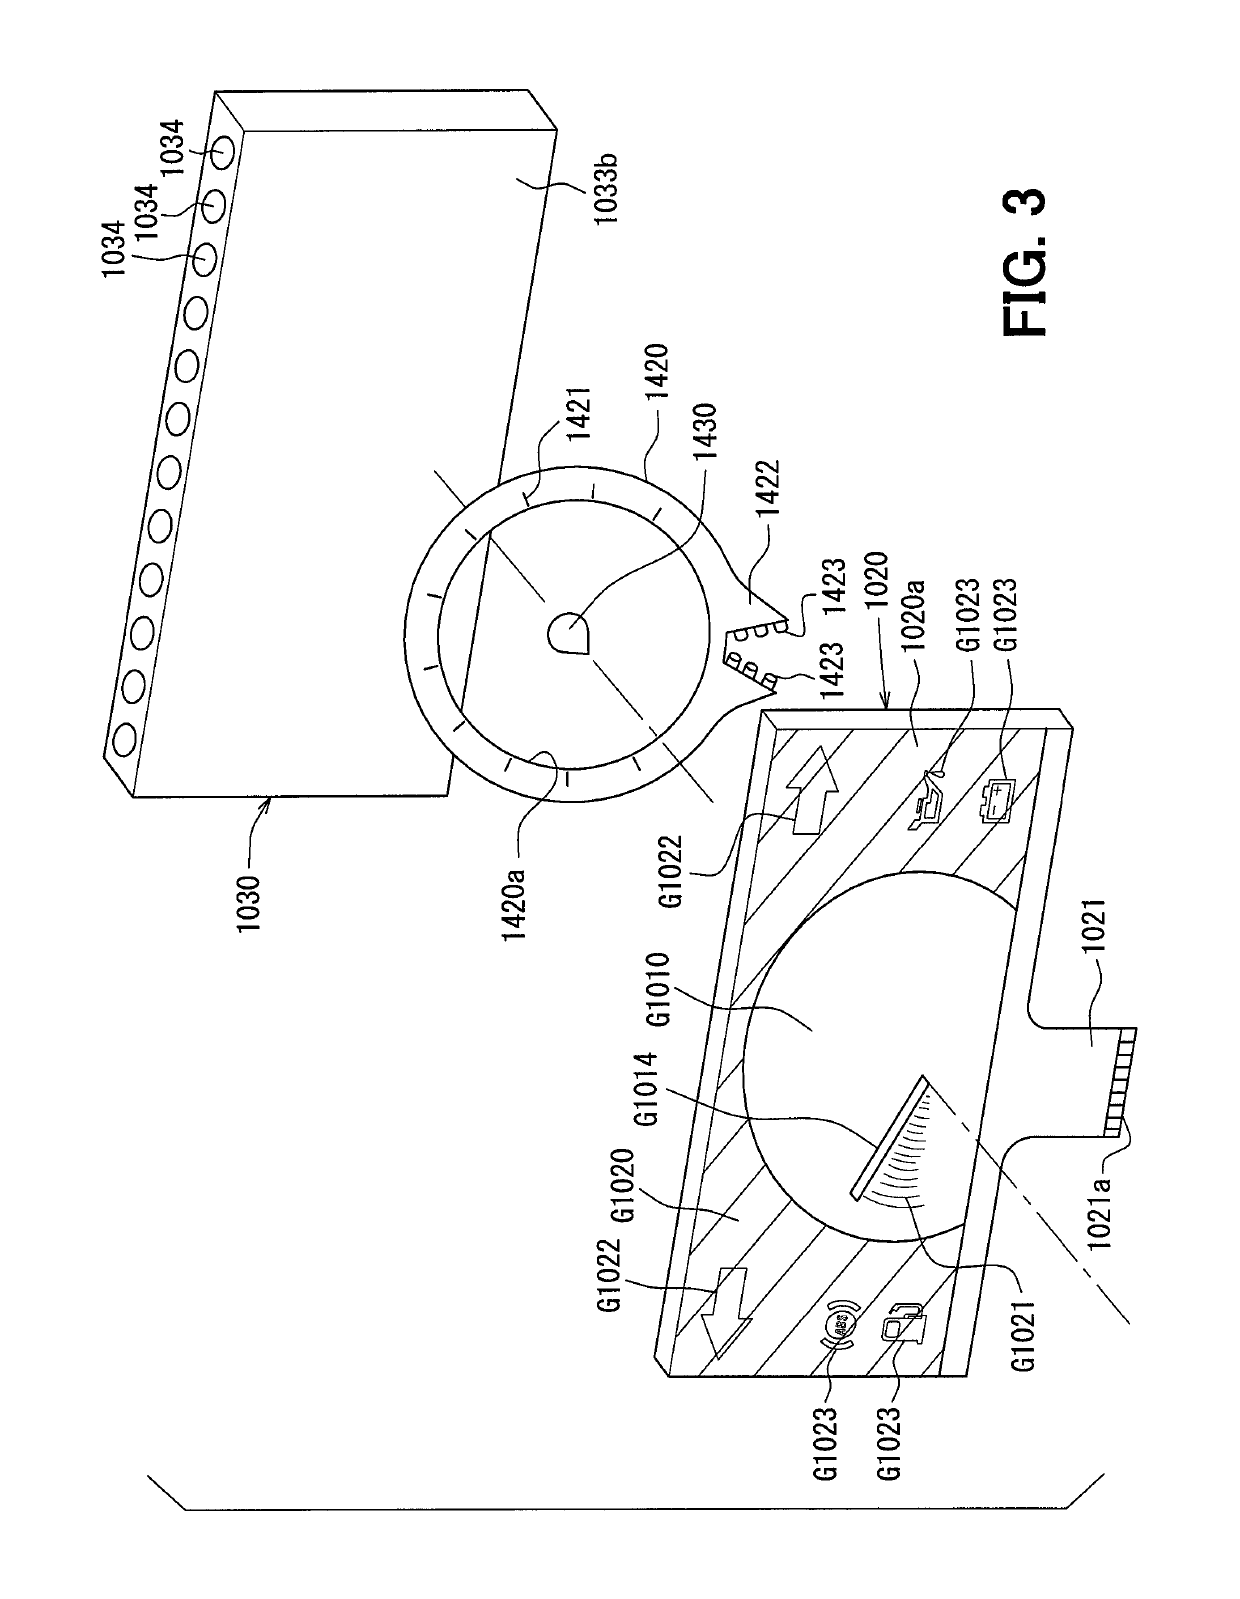 Display device with backlight